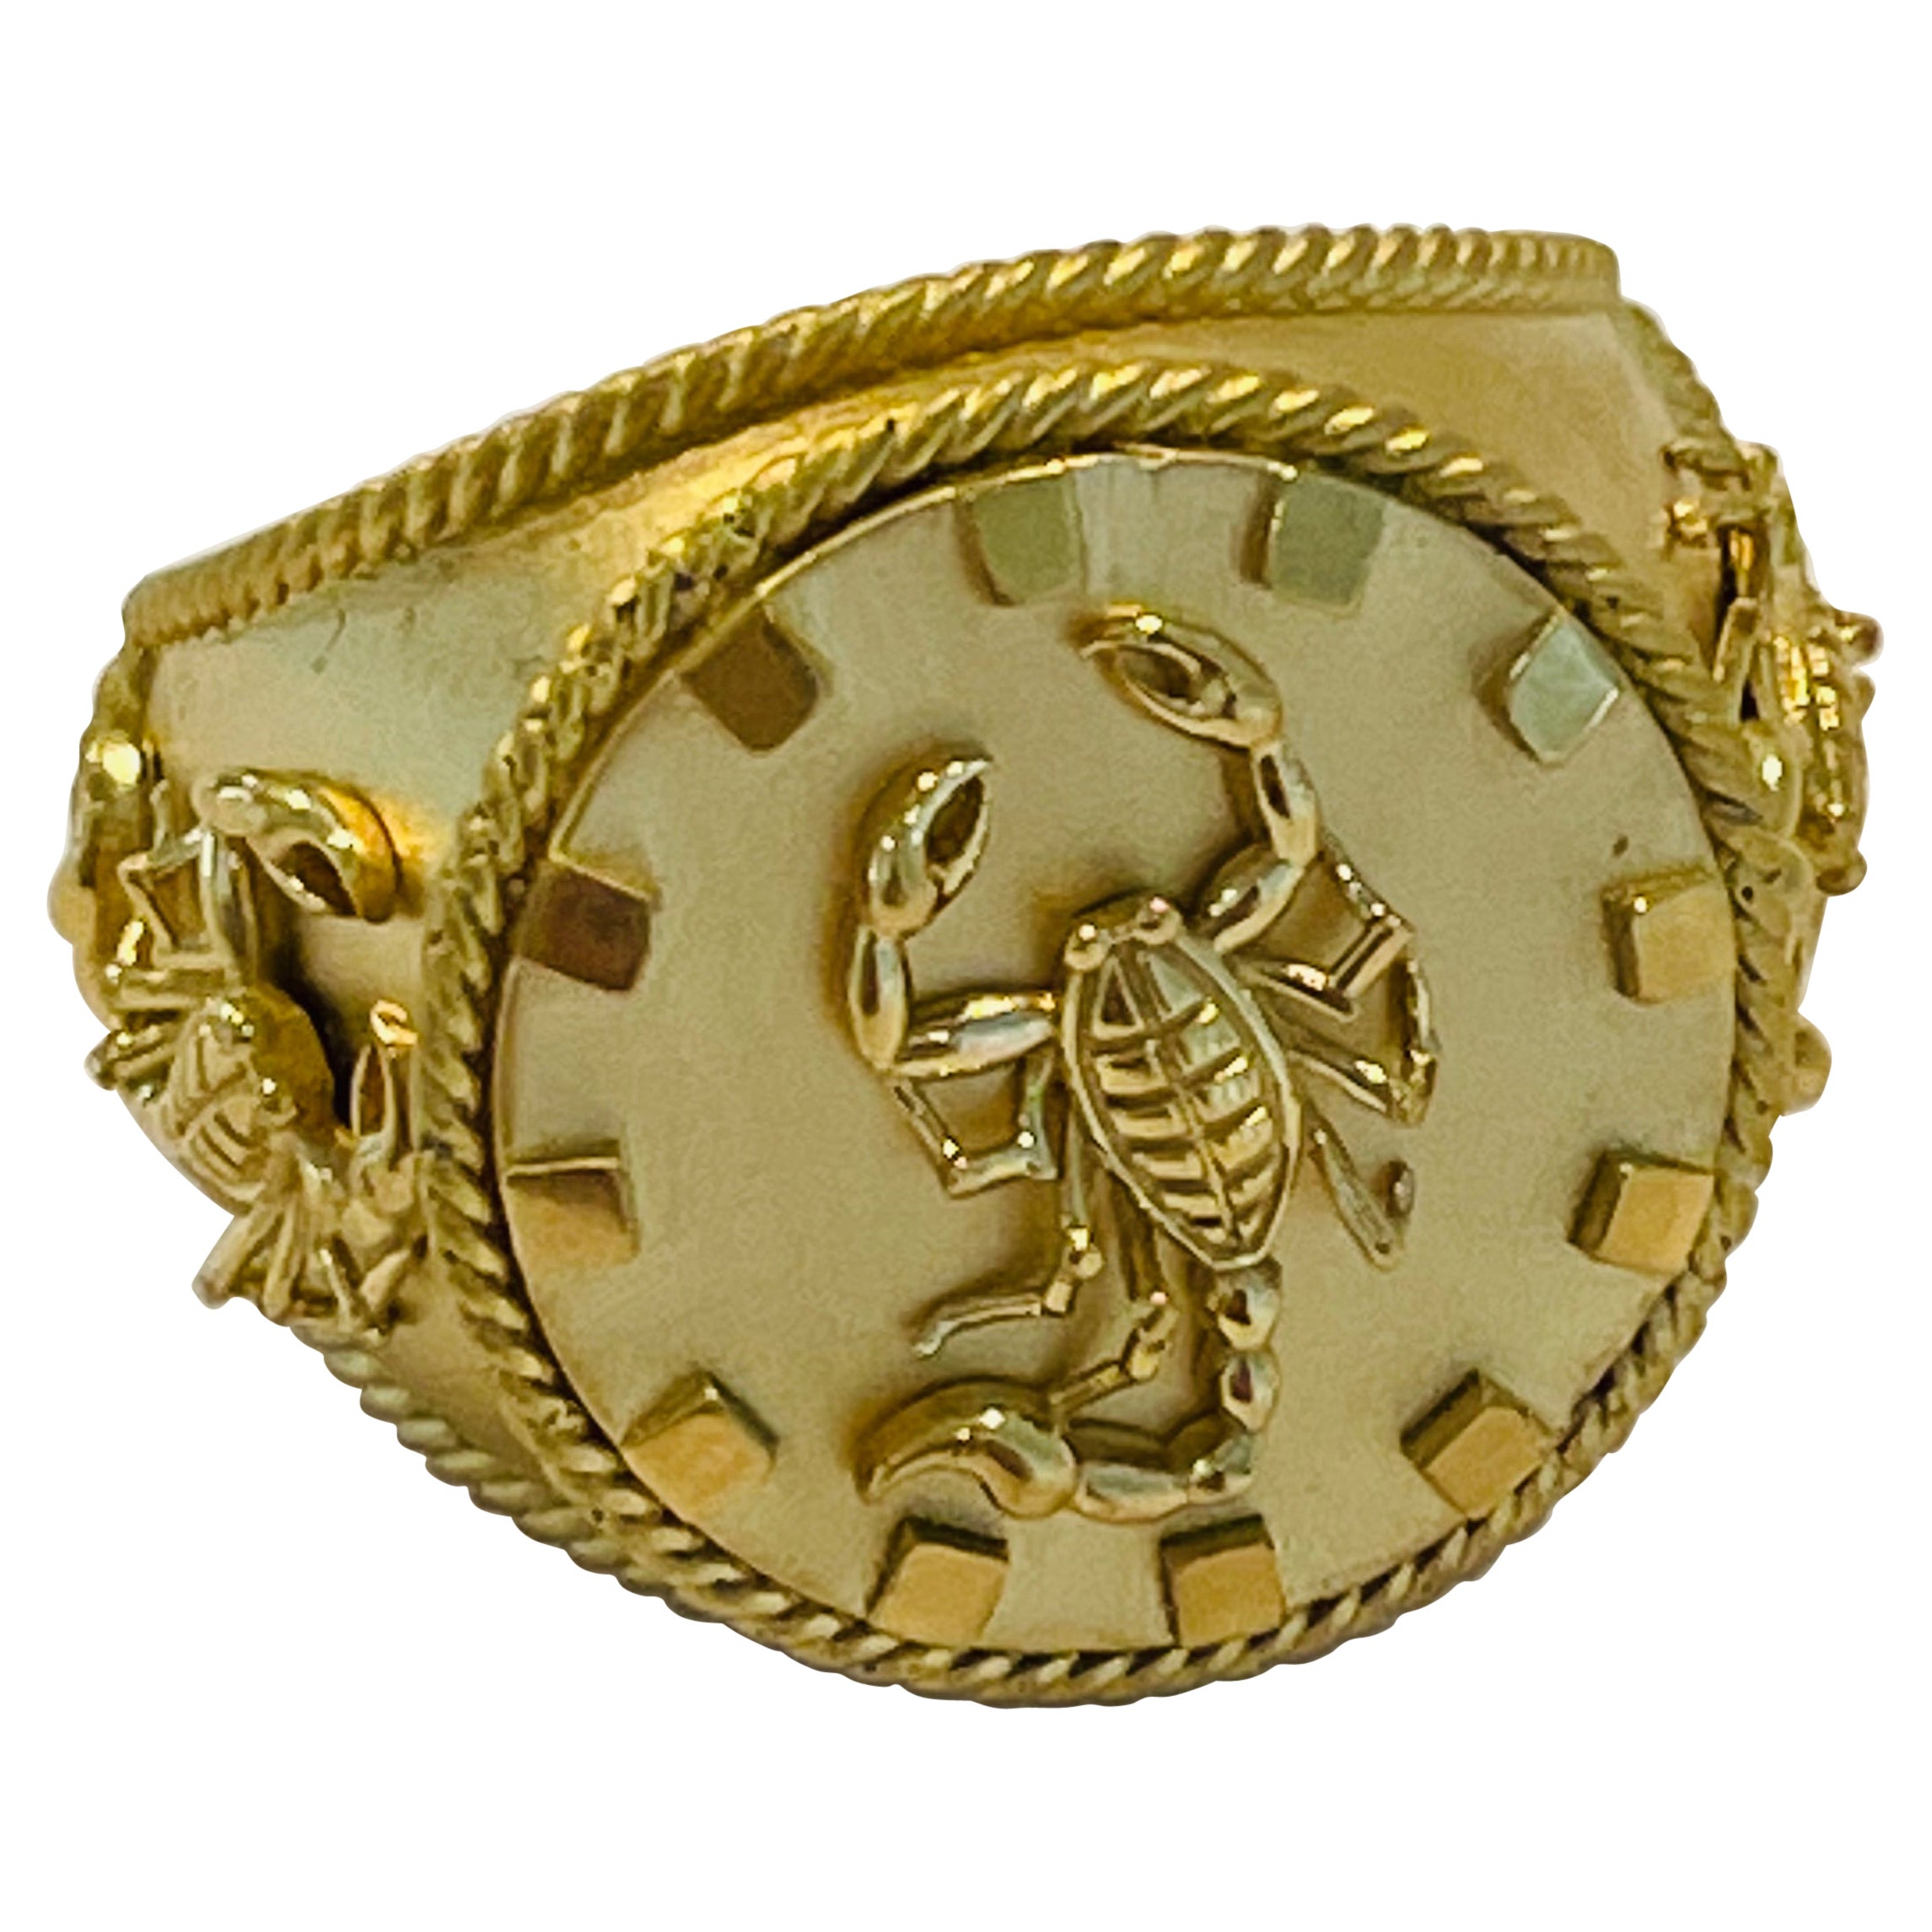 Zodiac Scorpion Ring in 22k Gold by Tagili For Sale